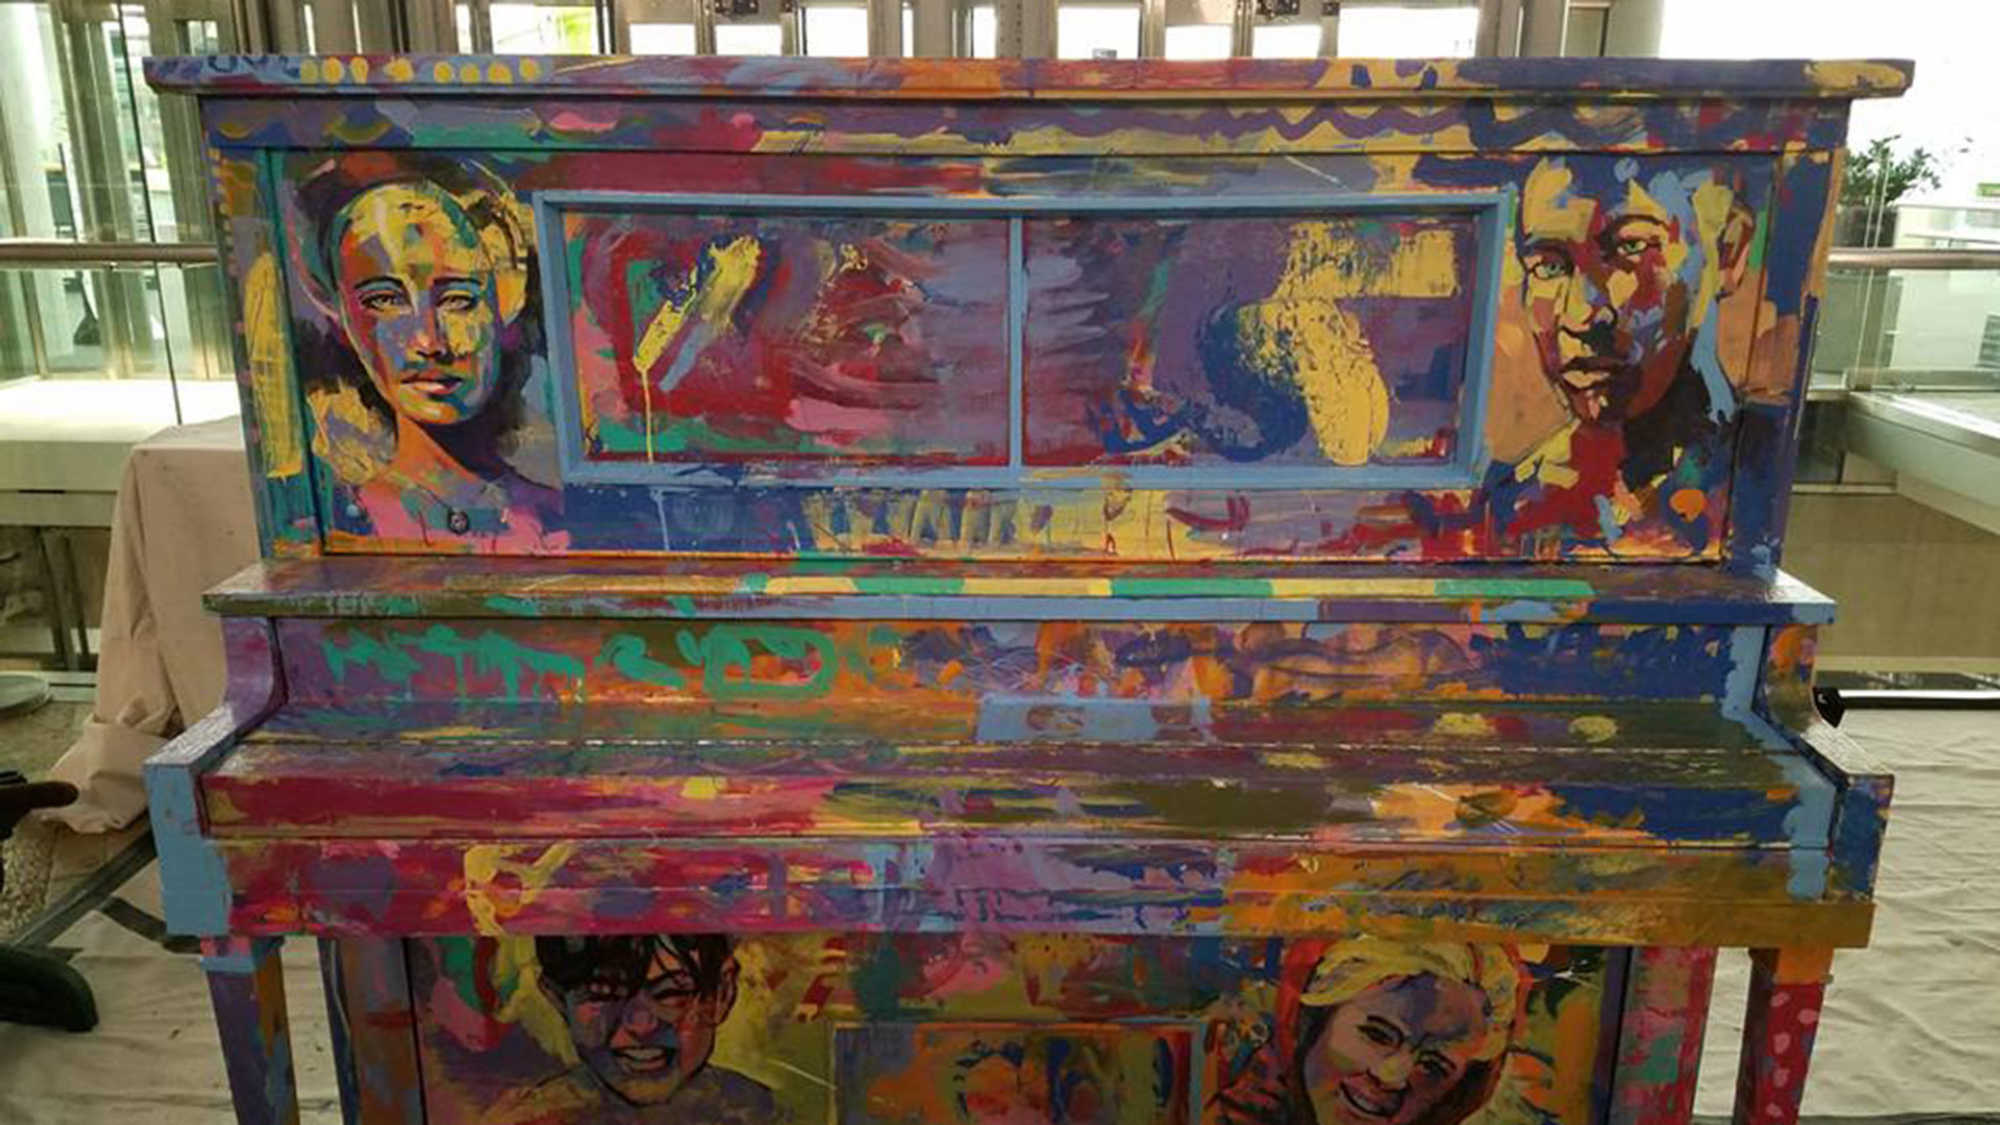 A painted piano at the Salt Lake City Public Library